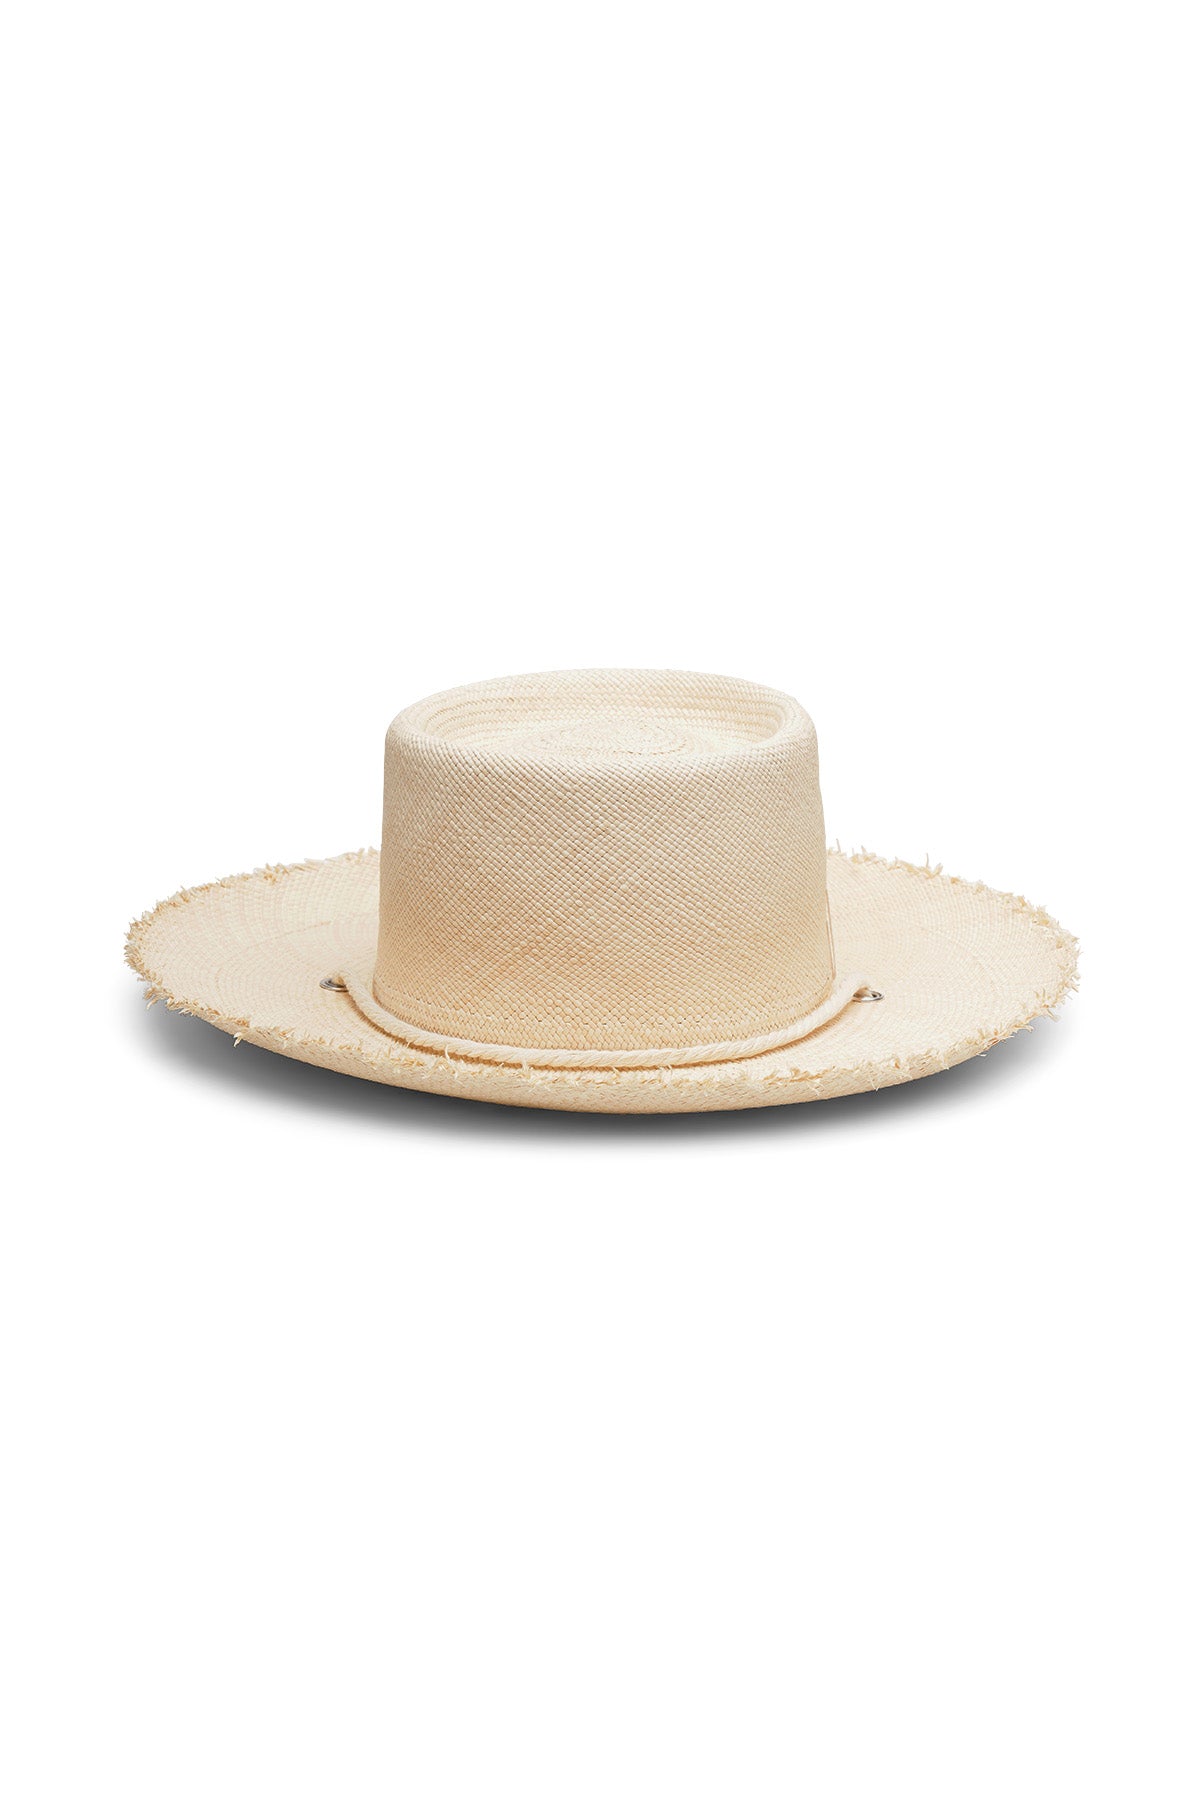 Natural straw bolero style hat with a wide frayed brim, telescope crown and off-white rope chin strap and yellow beads. Unisex hat style in various sizes and colors. We ship worldwide. Shop now. Each SoonNoon hat is handmade with unique character in Stockholm, Sweden.